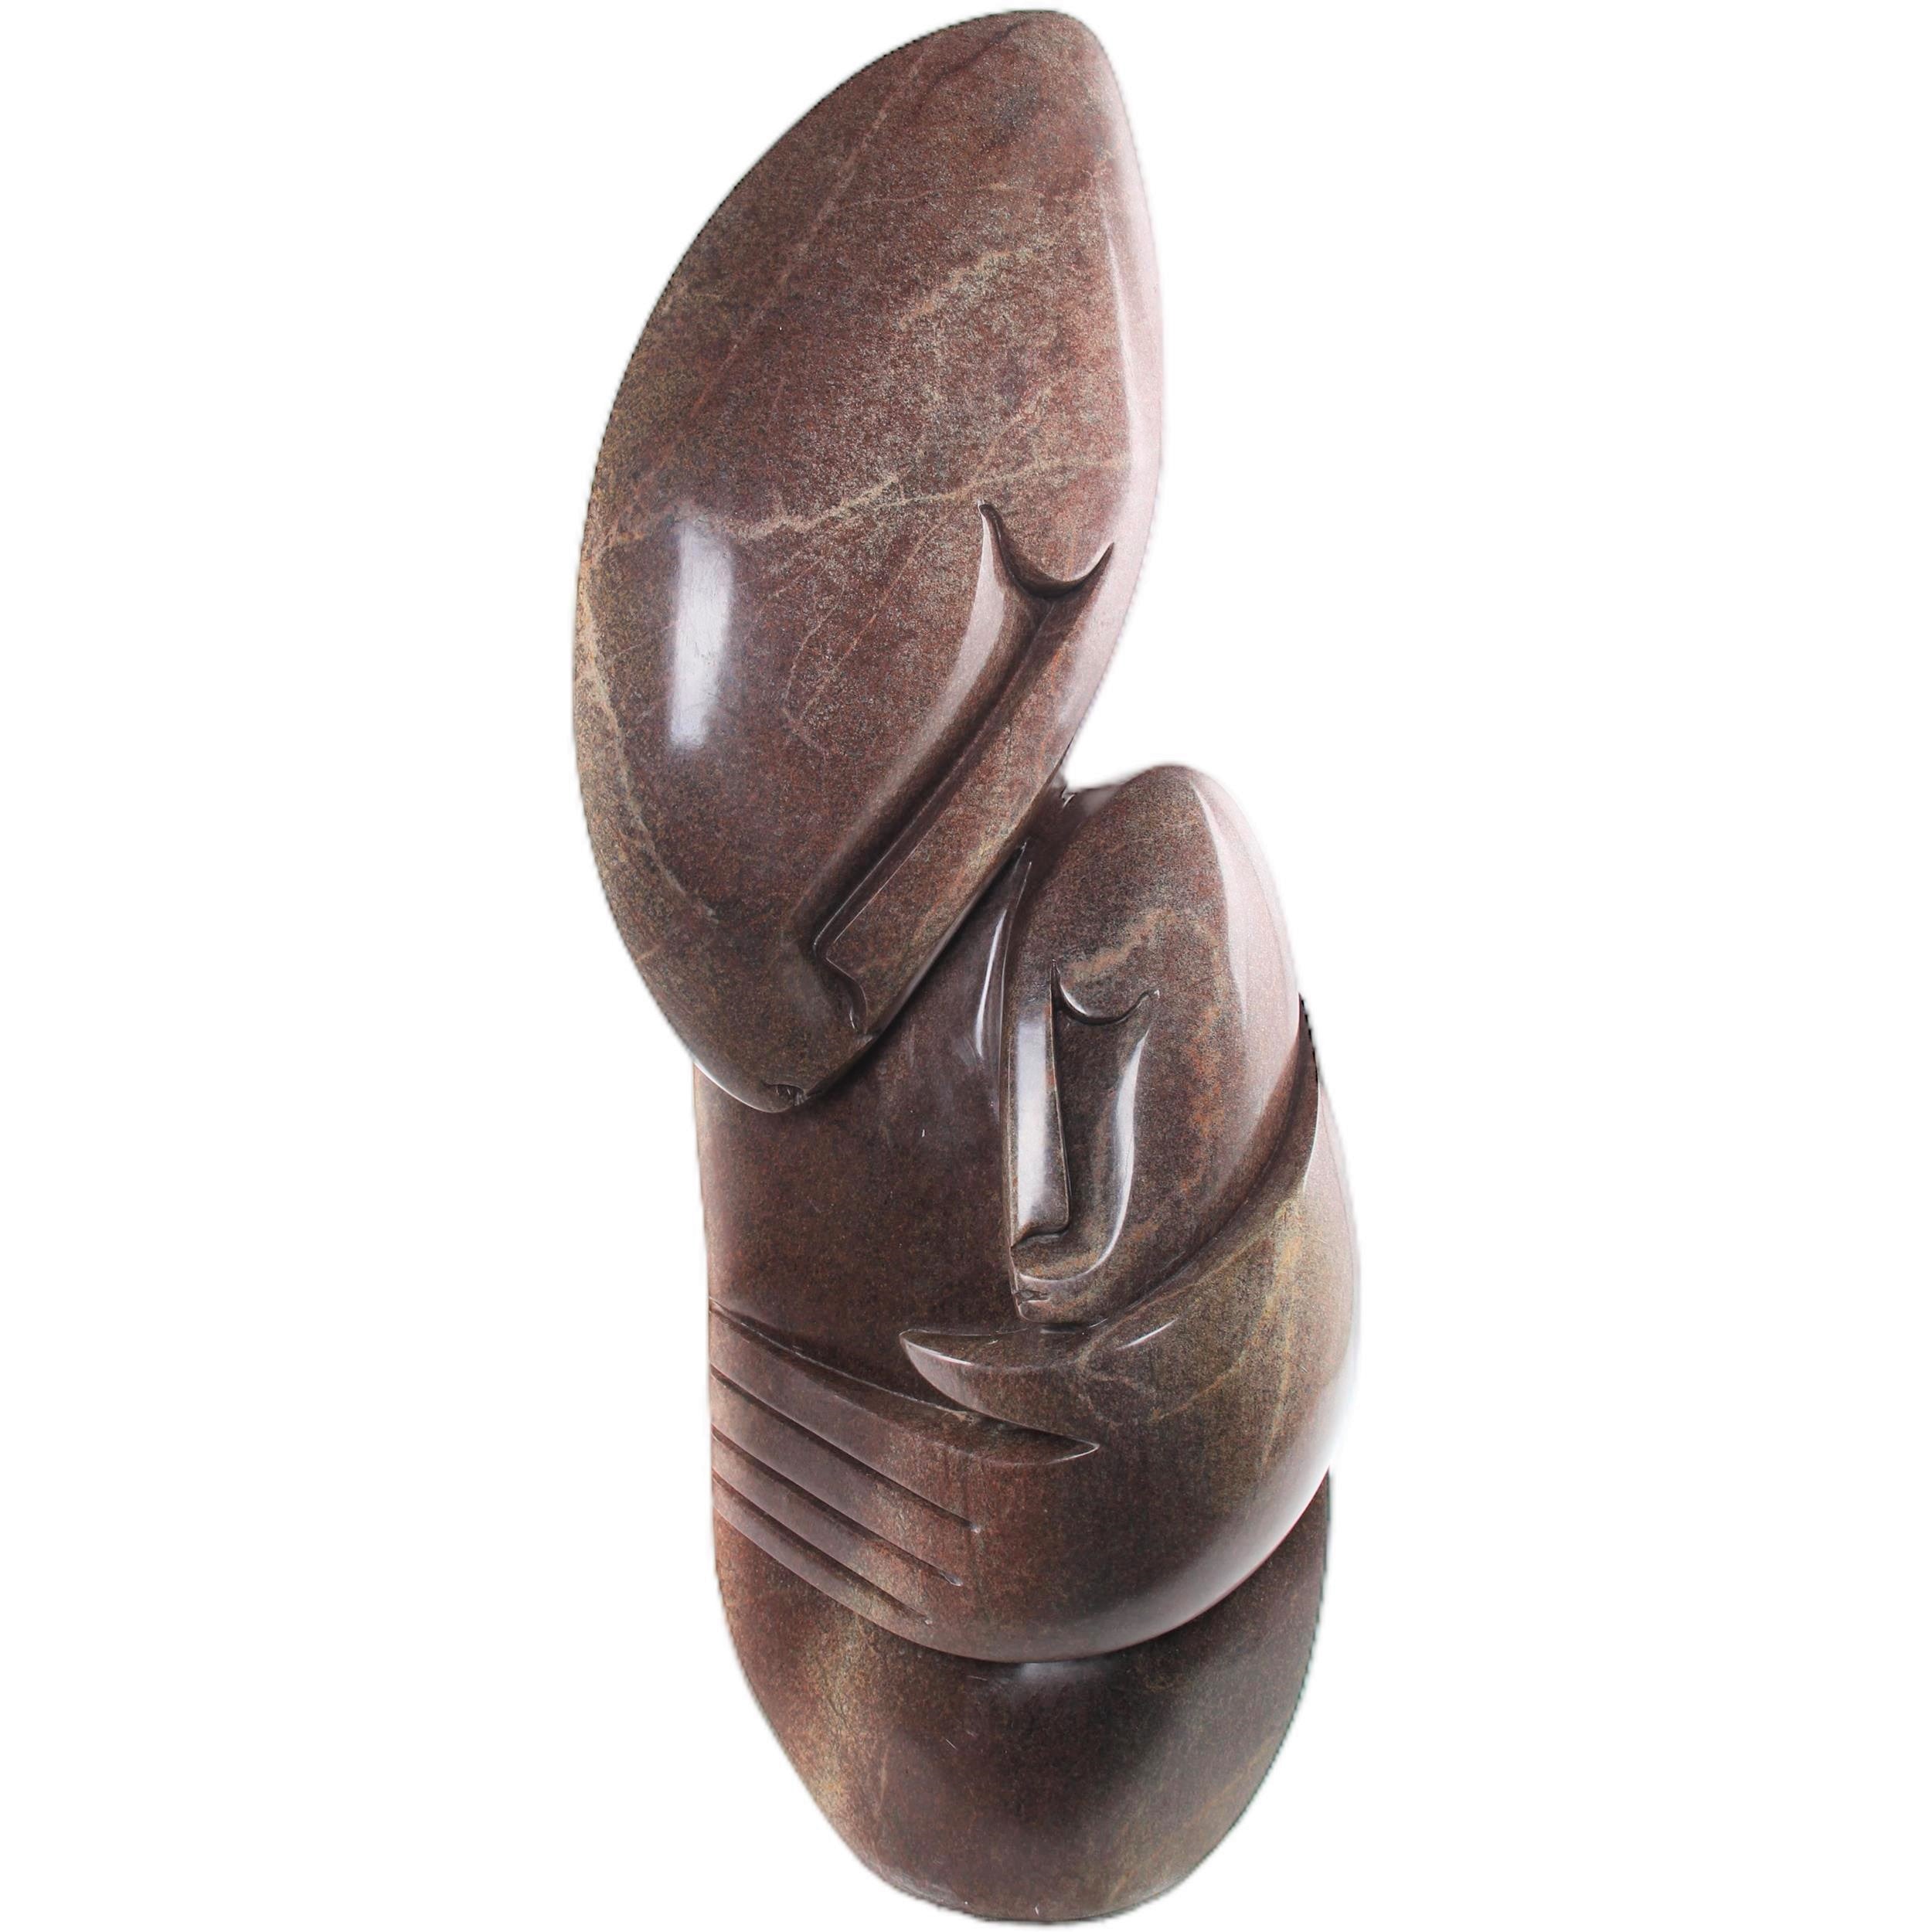 Shona Tribe Serpentine Stone Mother and Child ~44.1" Tall